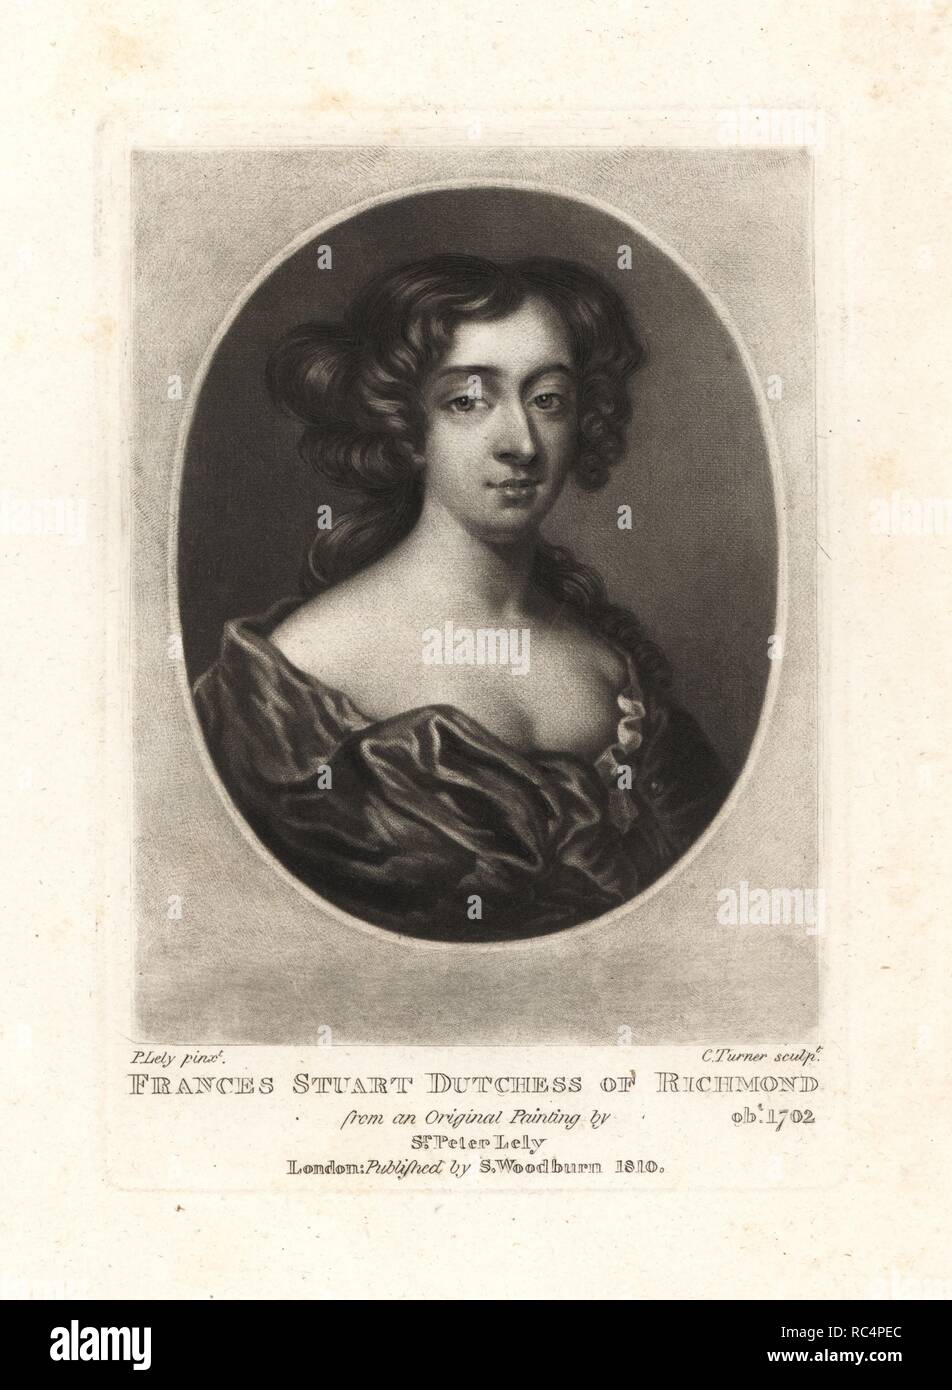 Frances Stuart, Duchess of Richmond, famous beauty at the court of King Charles II, died 1702. Copperplate mezzotint by Charles Turner after an original painting by Sir Peter Lely from Samuel Woodburn's Portraits of Characters Illustrious in British History, London, 1810. Stock Photo